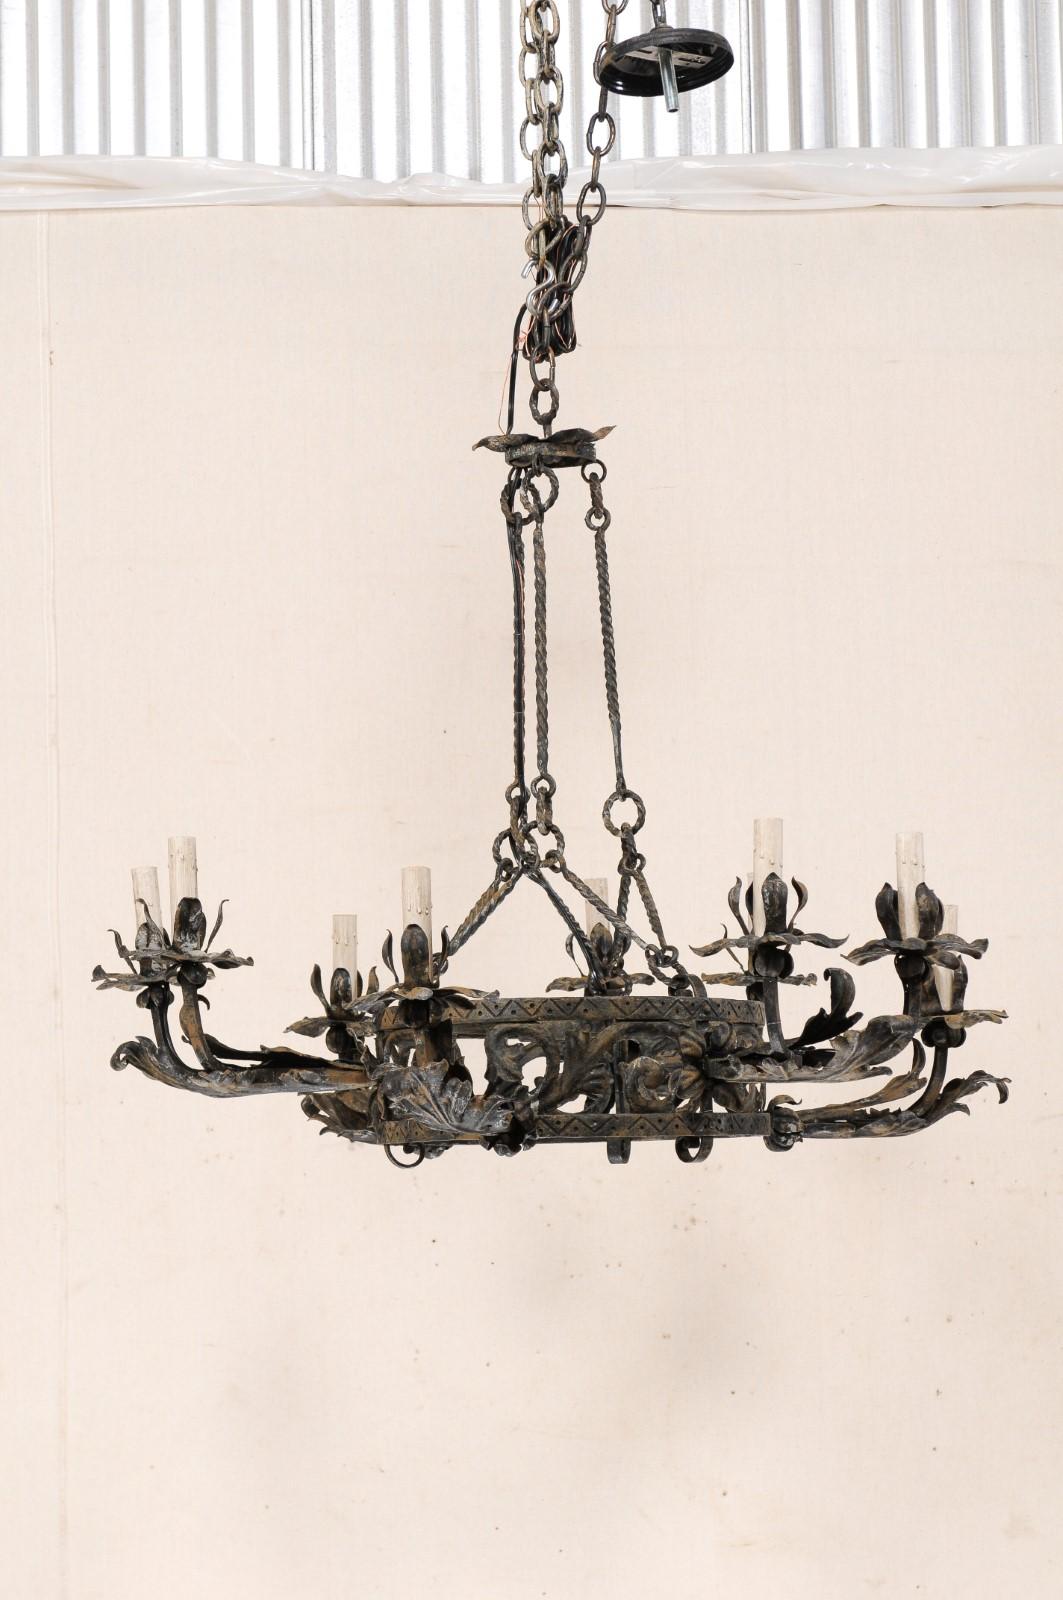 An Italian nine-light forged-iron chandelier from the mid 20th century. This vintage chandelier form Italy features a double-ringed central gallery, adorn with scrolled leaf motif and a dot and triangular design carved along the exterior of each